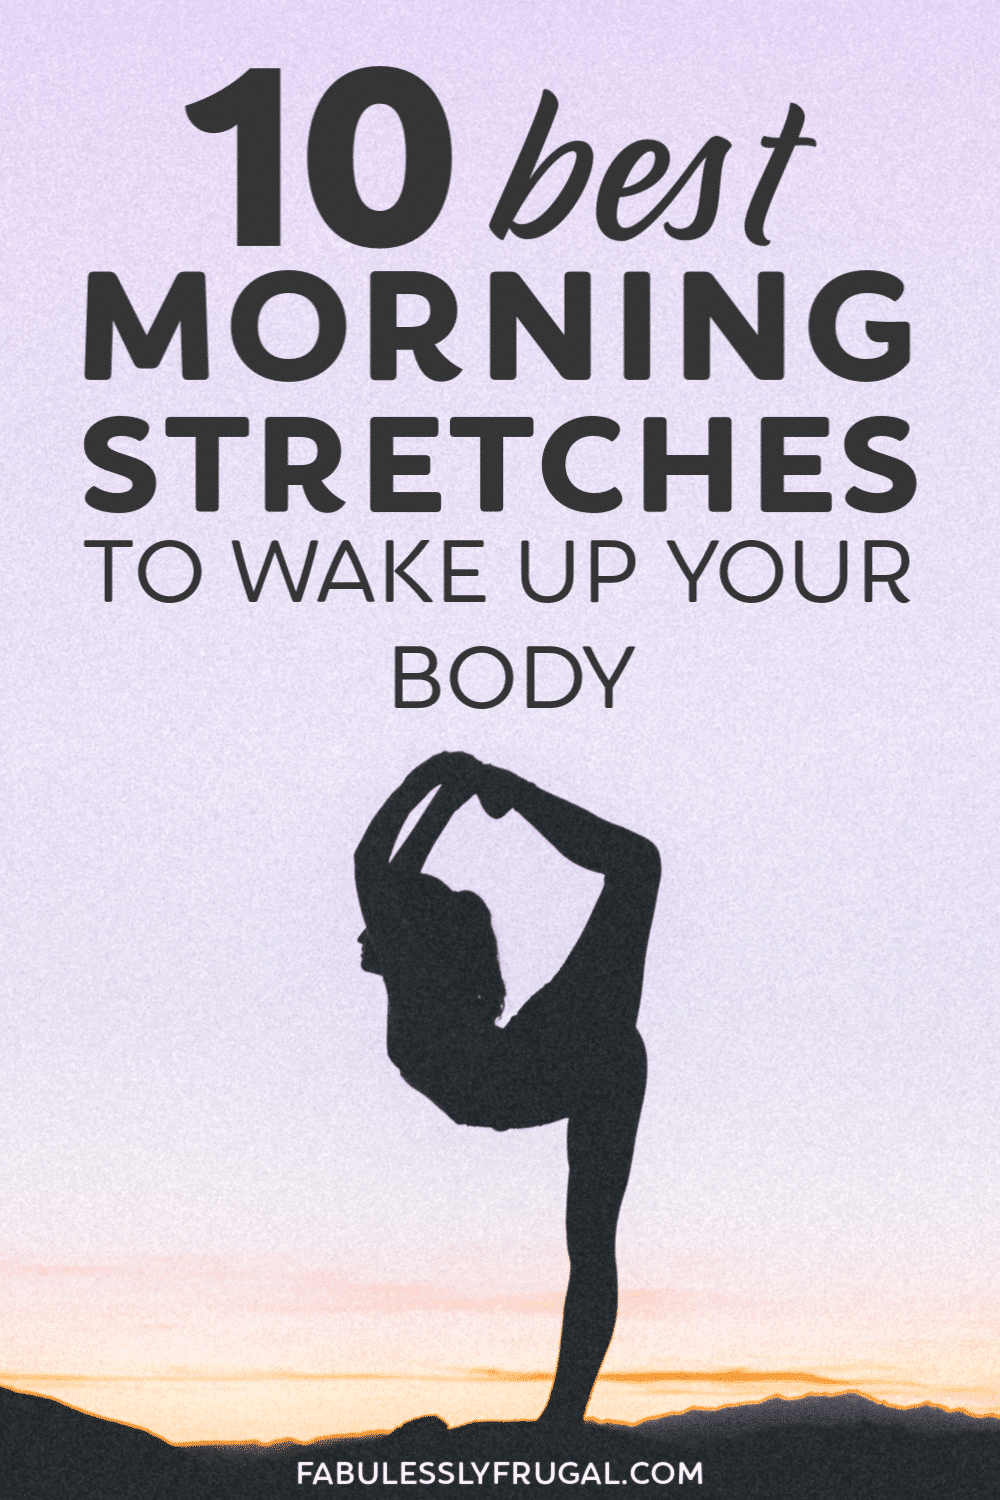 Morning stretches to wake up your body